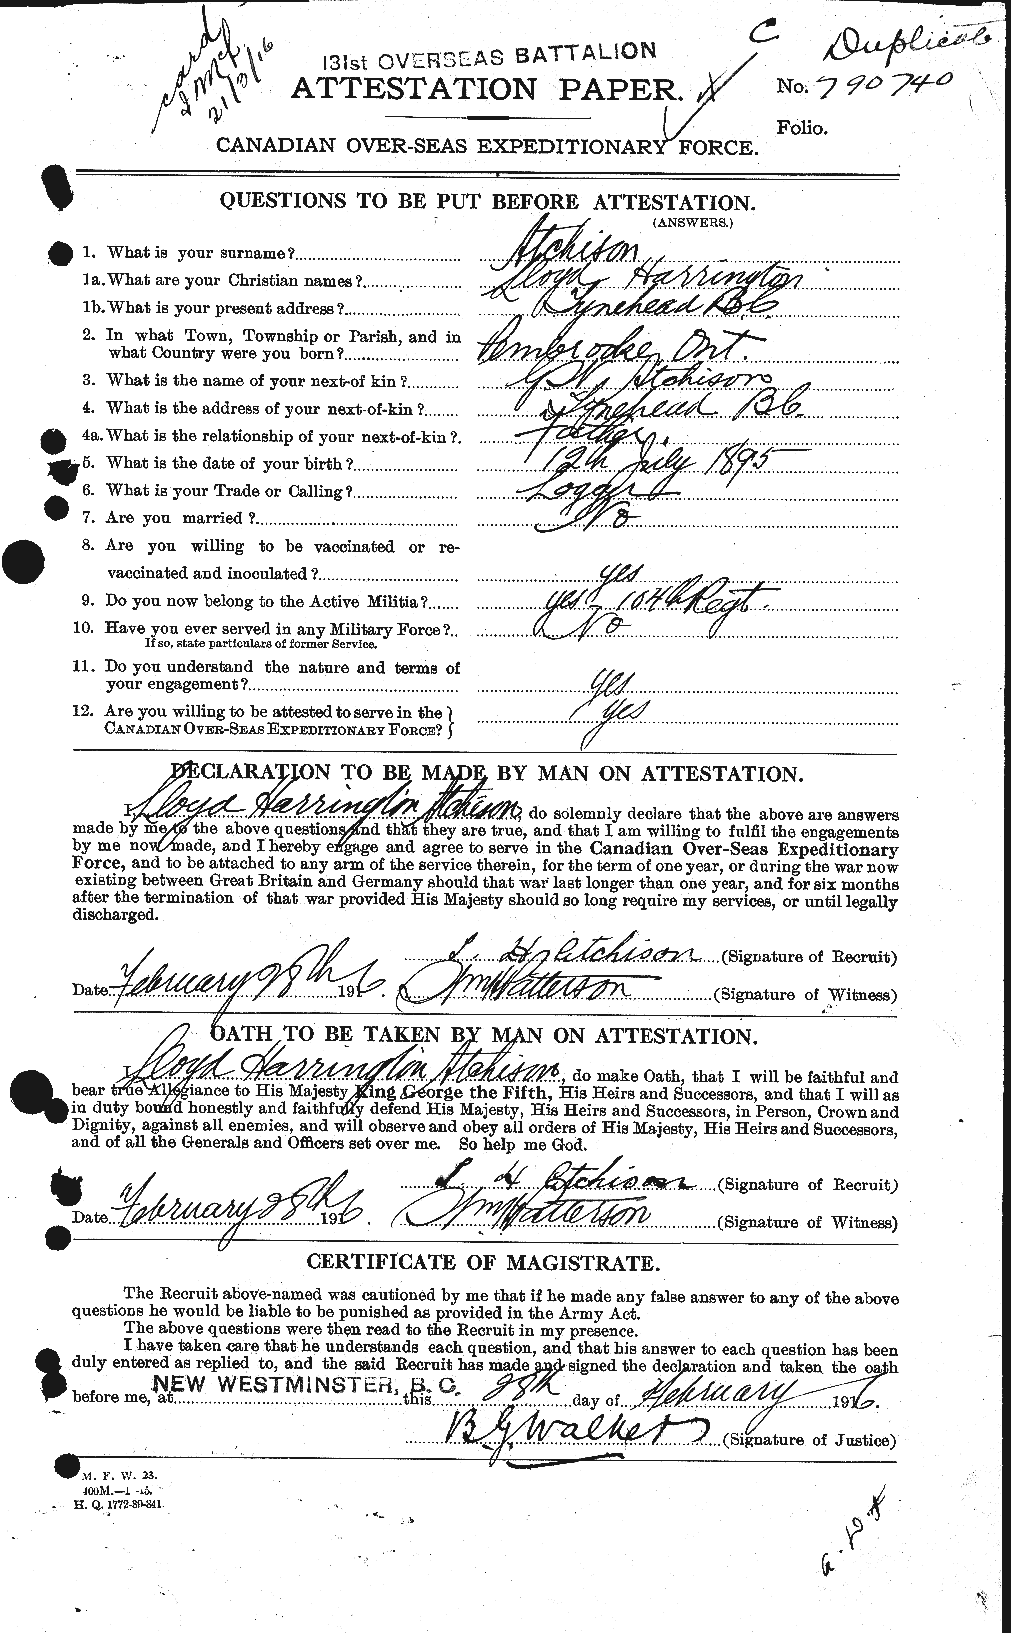 Personnel Records of the First World War - CEF 217022a